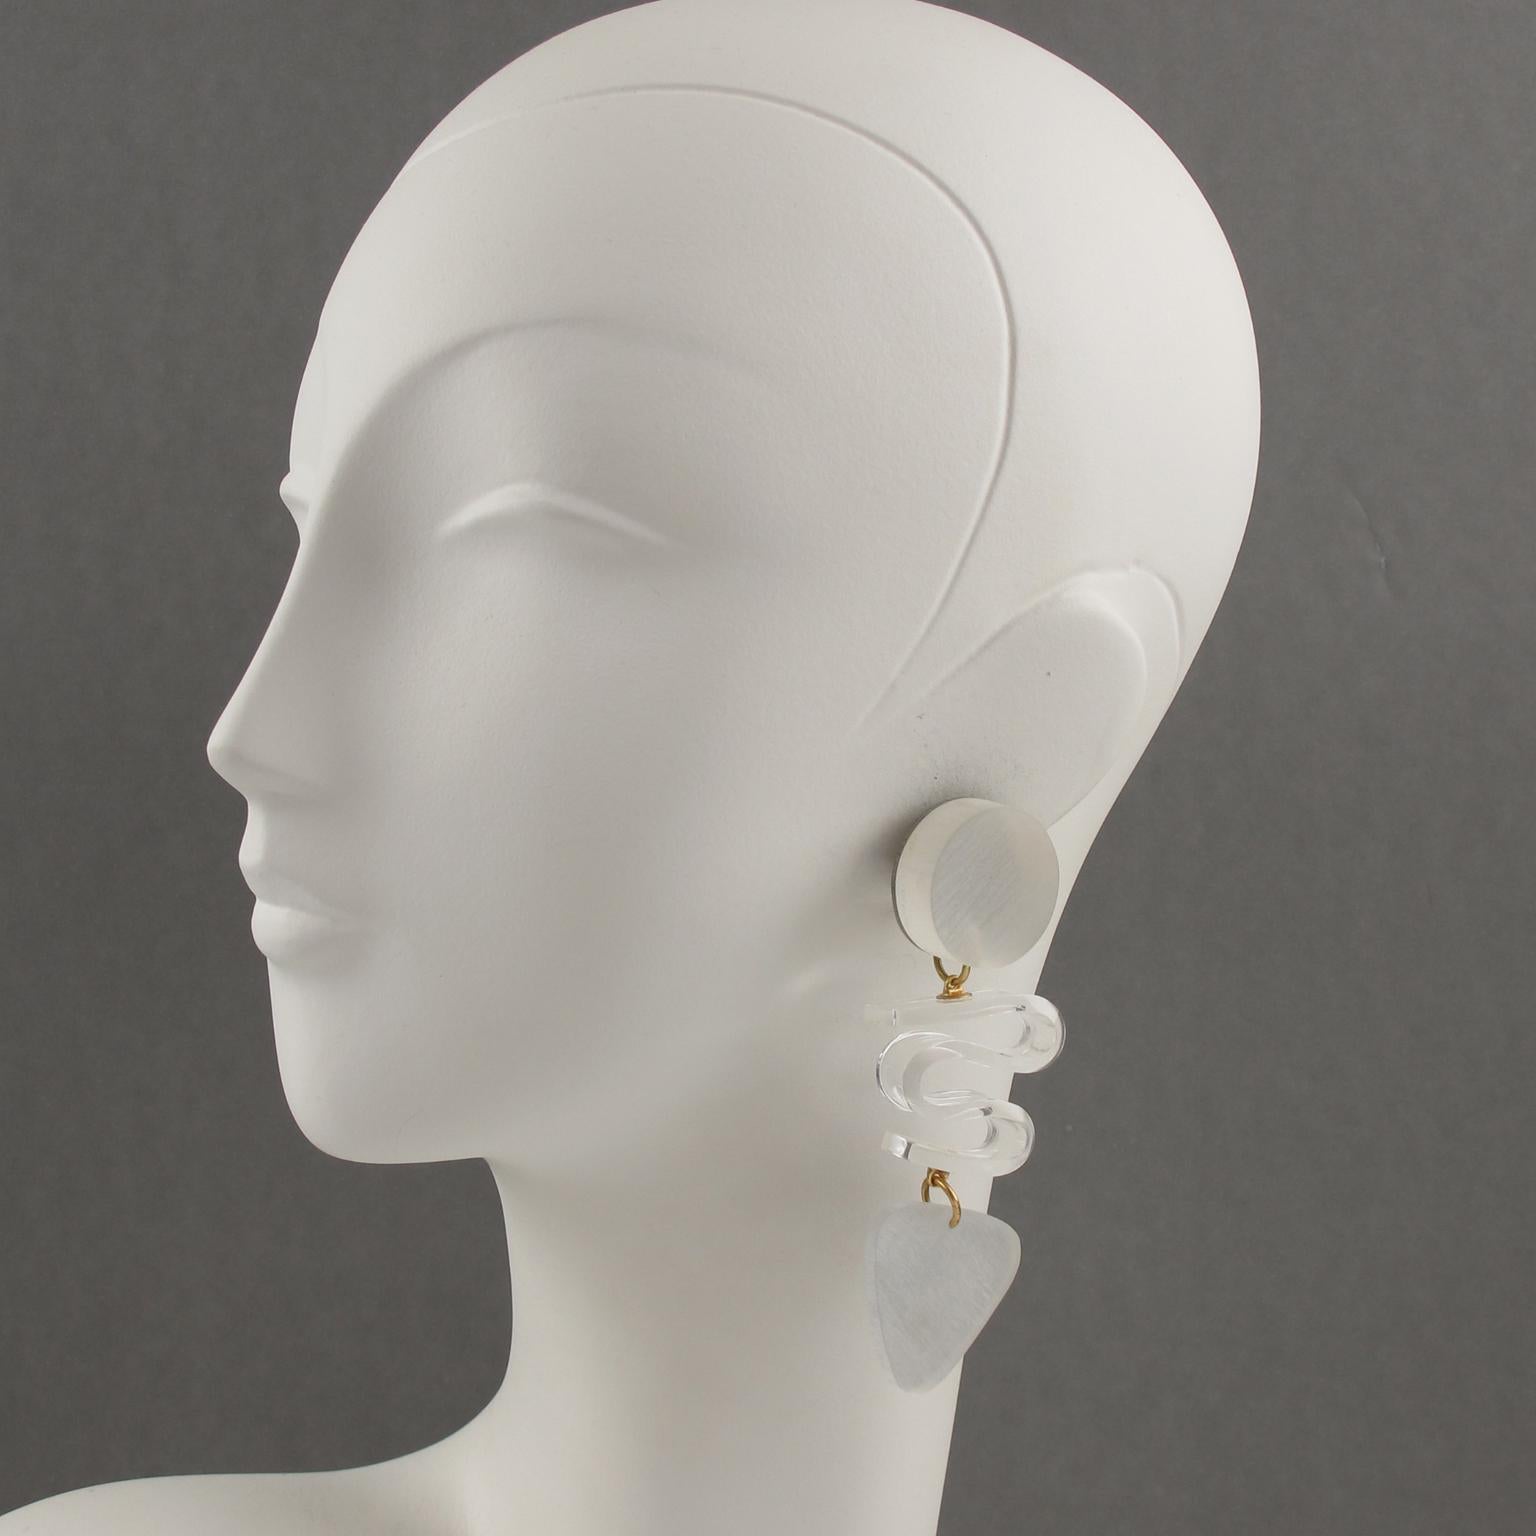 Stunning oversized Lucite clip-on earrings designed by Harriet Bauknight for Kaso. Huge chandelier dangling shape featuring a dimensional geometric design in frosted white color compliment with twisted transparent Lucite element. The earrings are